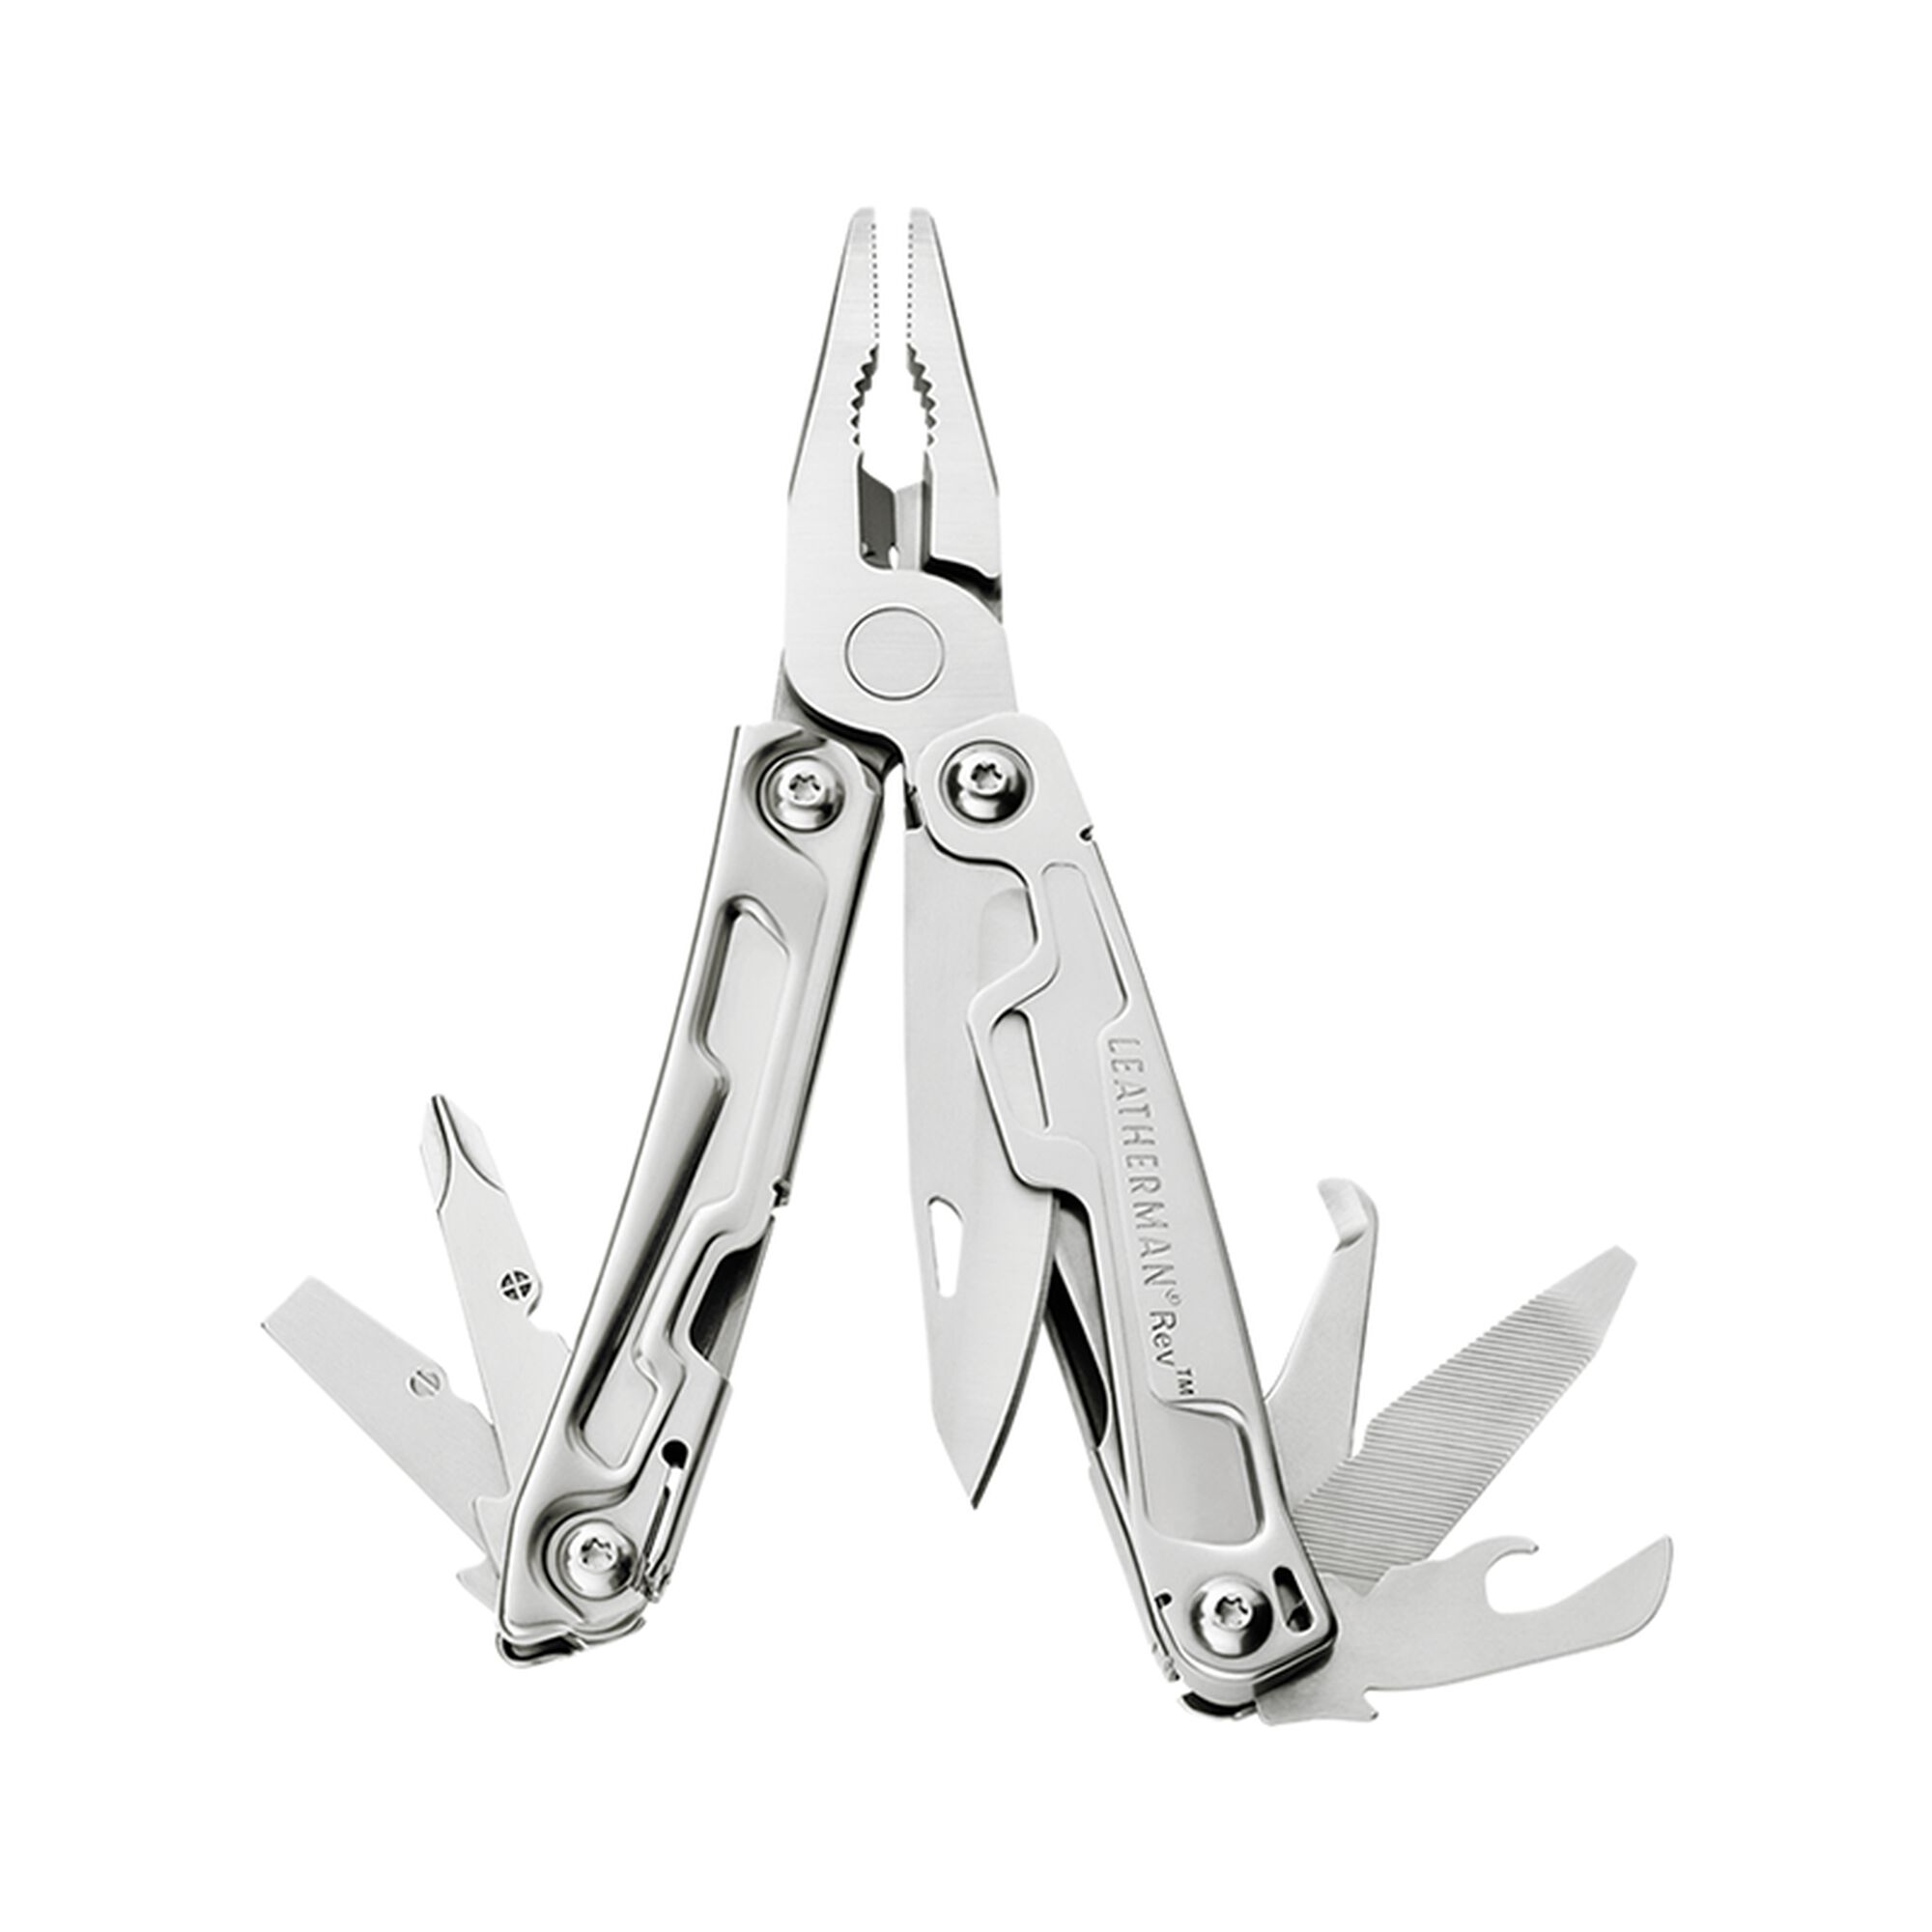 How to Care for Your Leatherman Tool